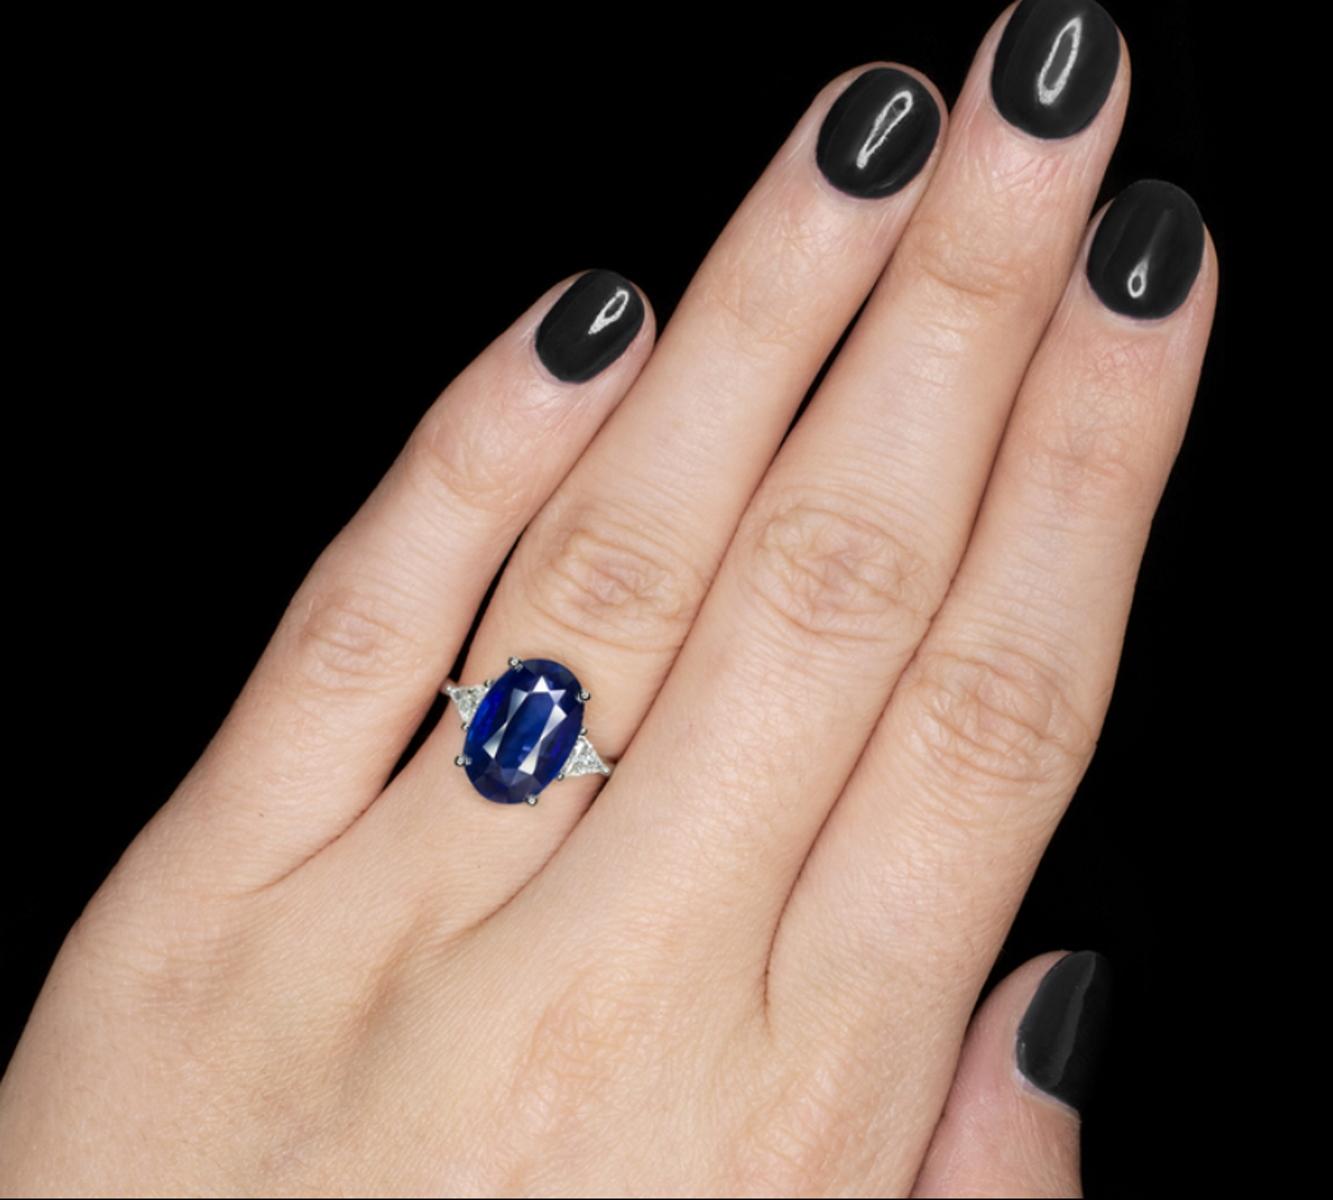 Sophisticated sapphire and diamond ring features a gorgeous oval cut royal blue sapphire accented by a bright white pair of trillion cut diamonds. The color of the 6.70ct GIA certified sapphire is absolutely stunning with a rich, velvety blue play